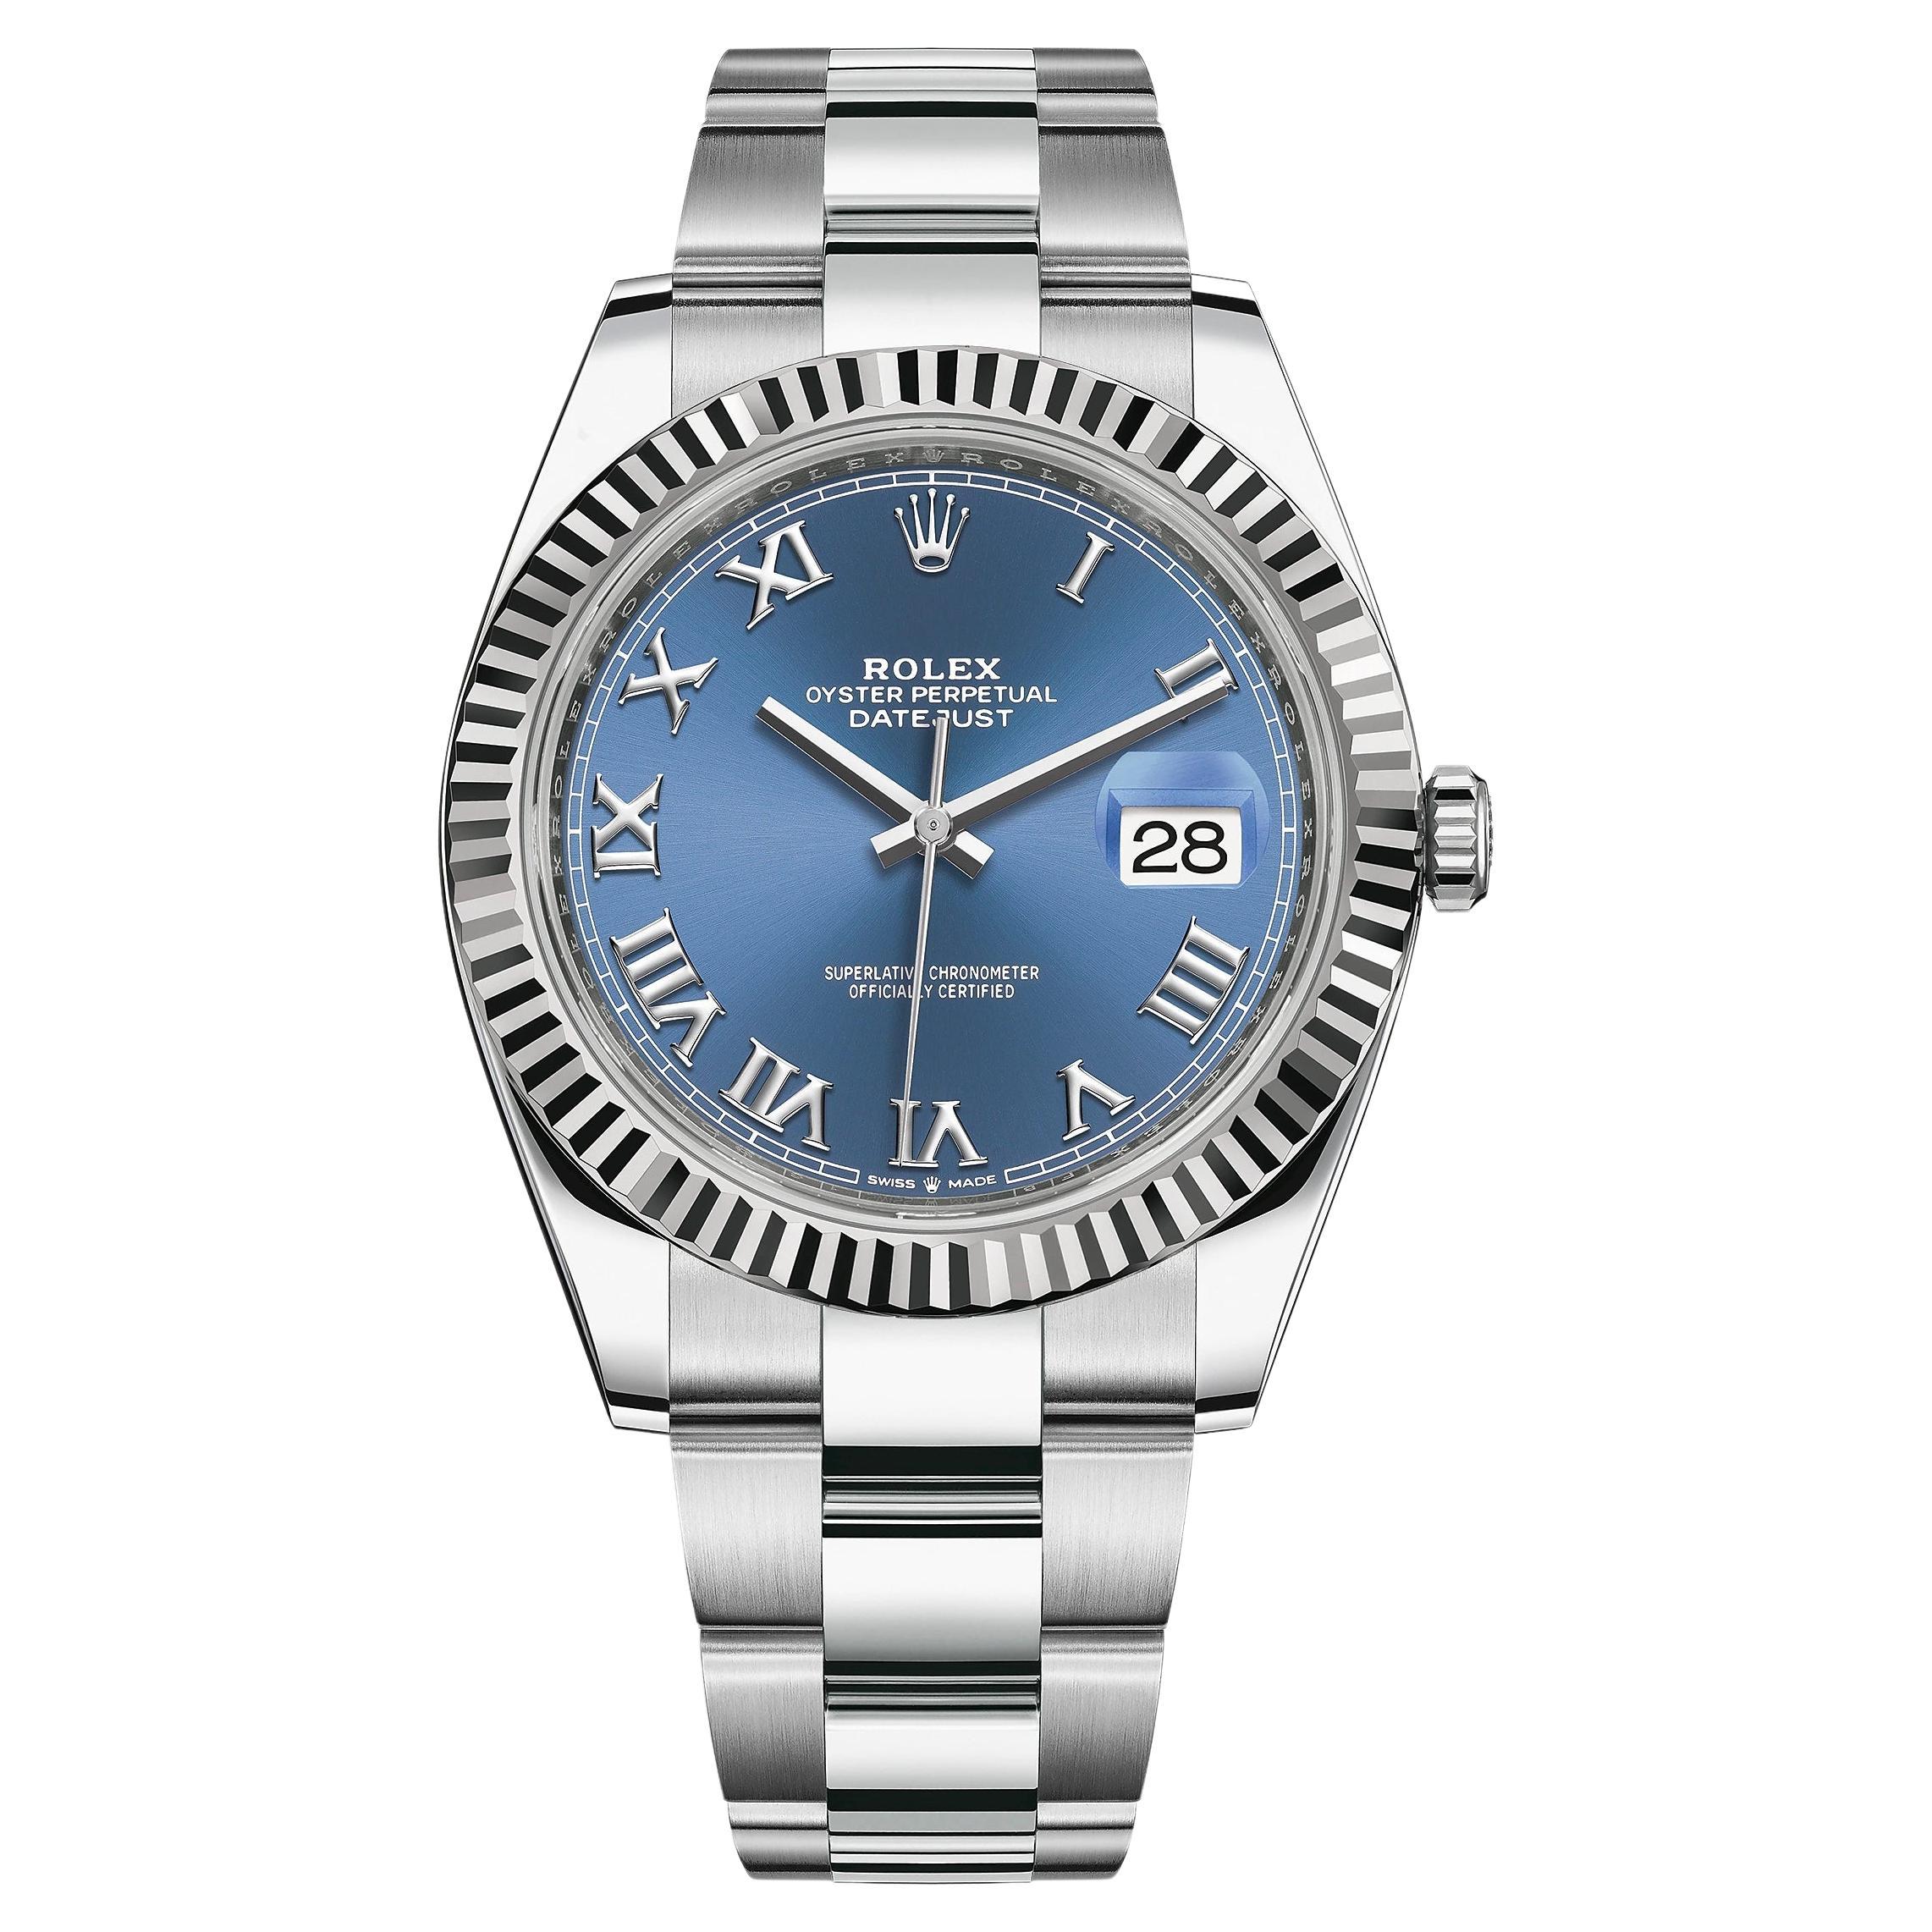 Rolex Datejust, Blue Roman, Oyster, Fluted, 126334, Unworn Watch, Complete For Sale